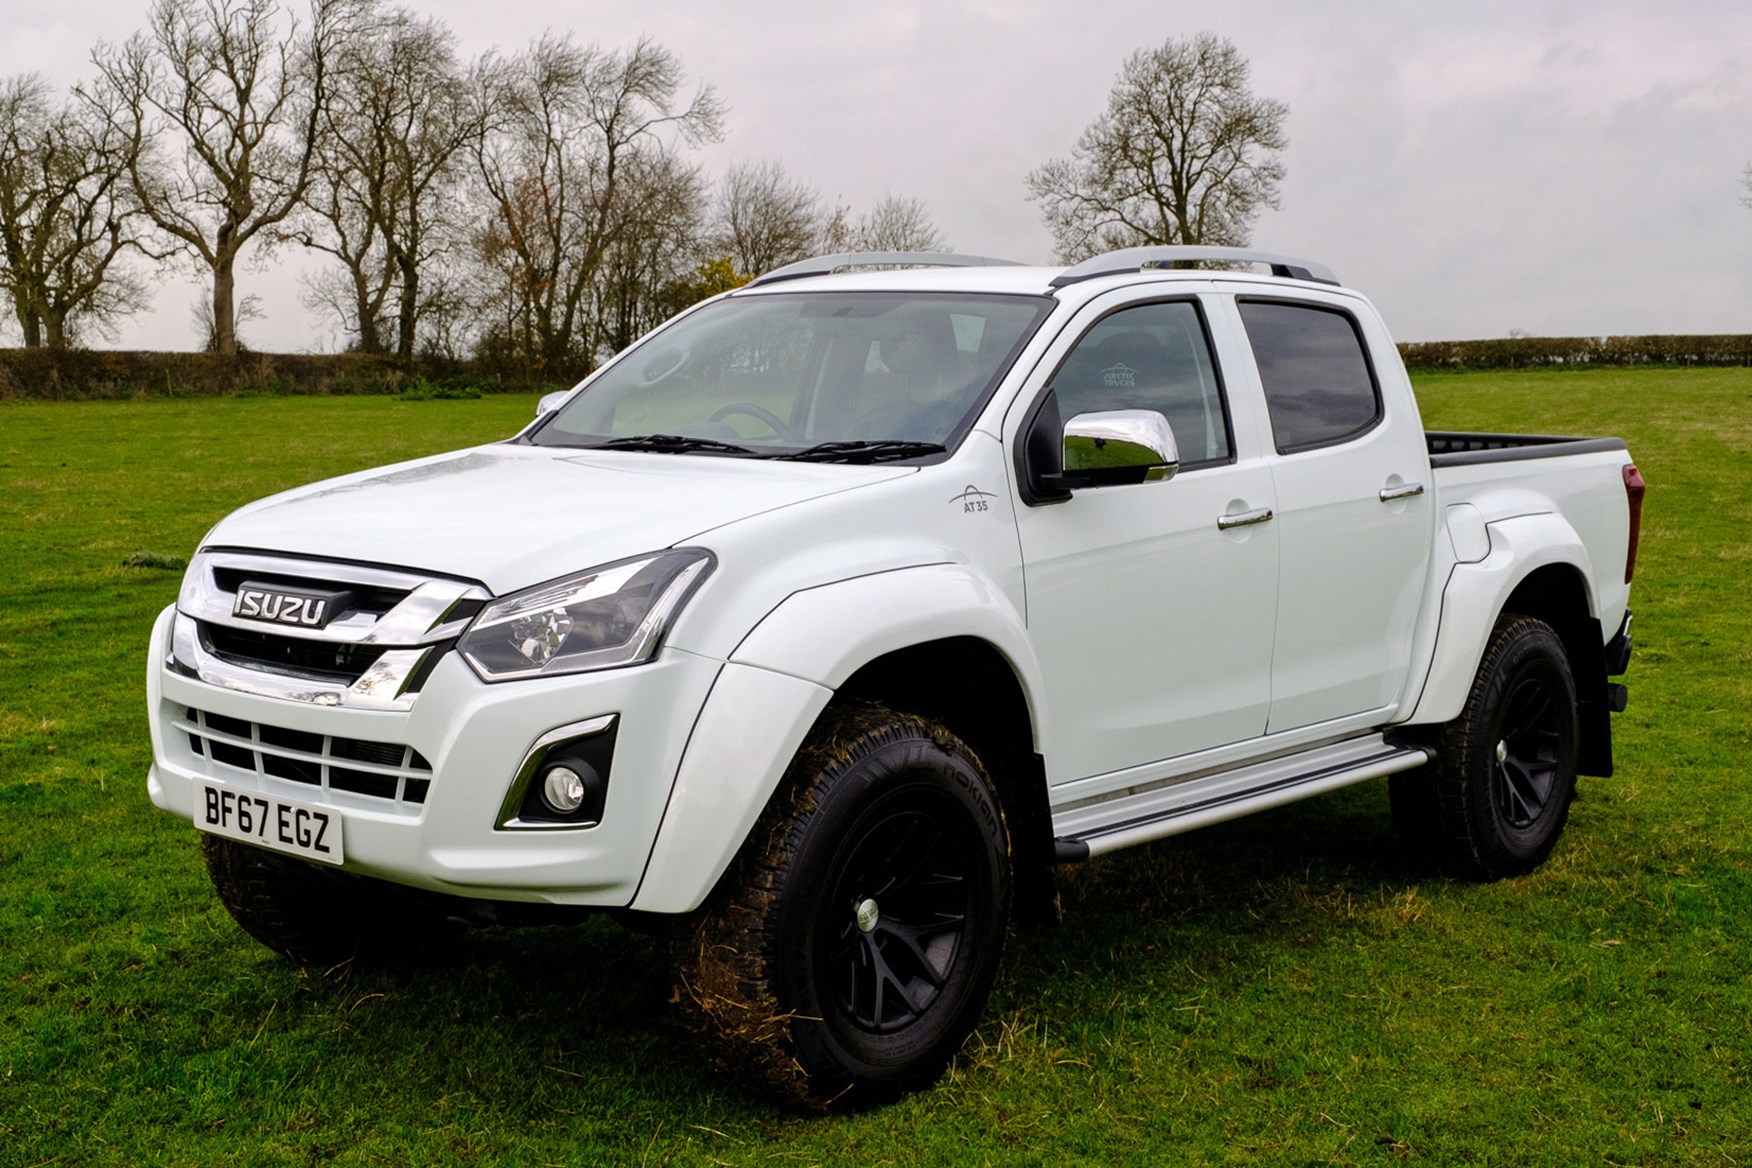 Isuzu D-Max AT35 1.9 review - front view, in field, white